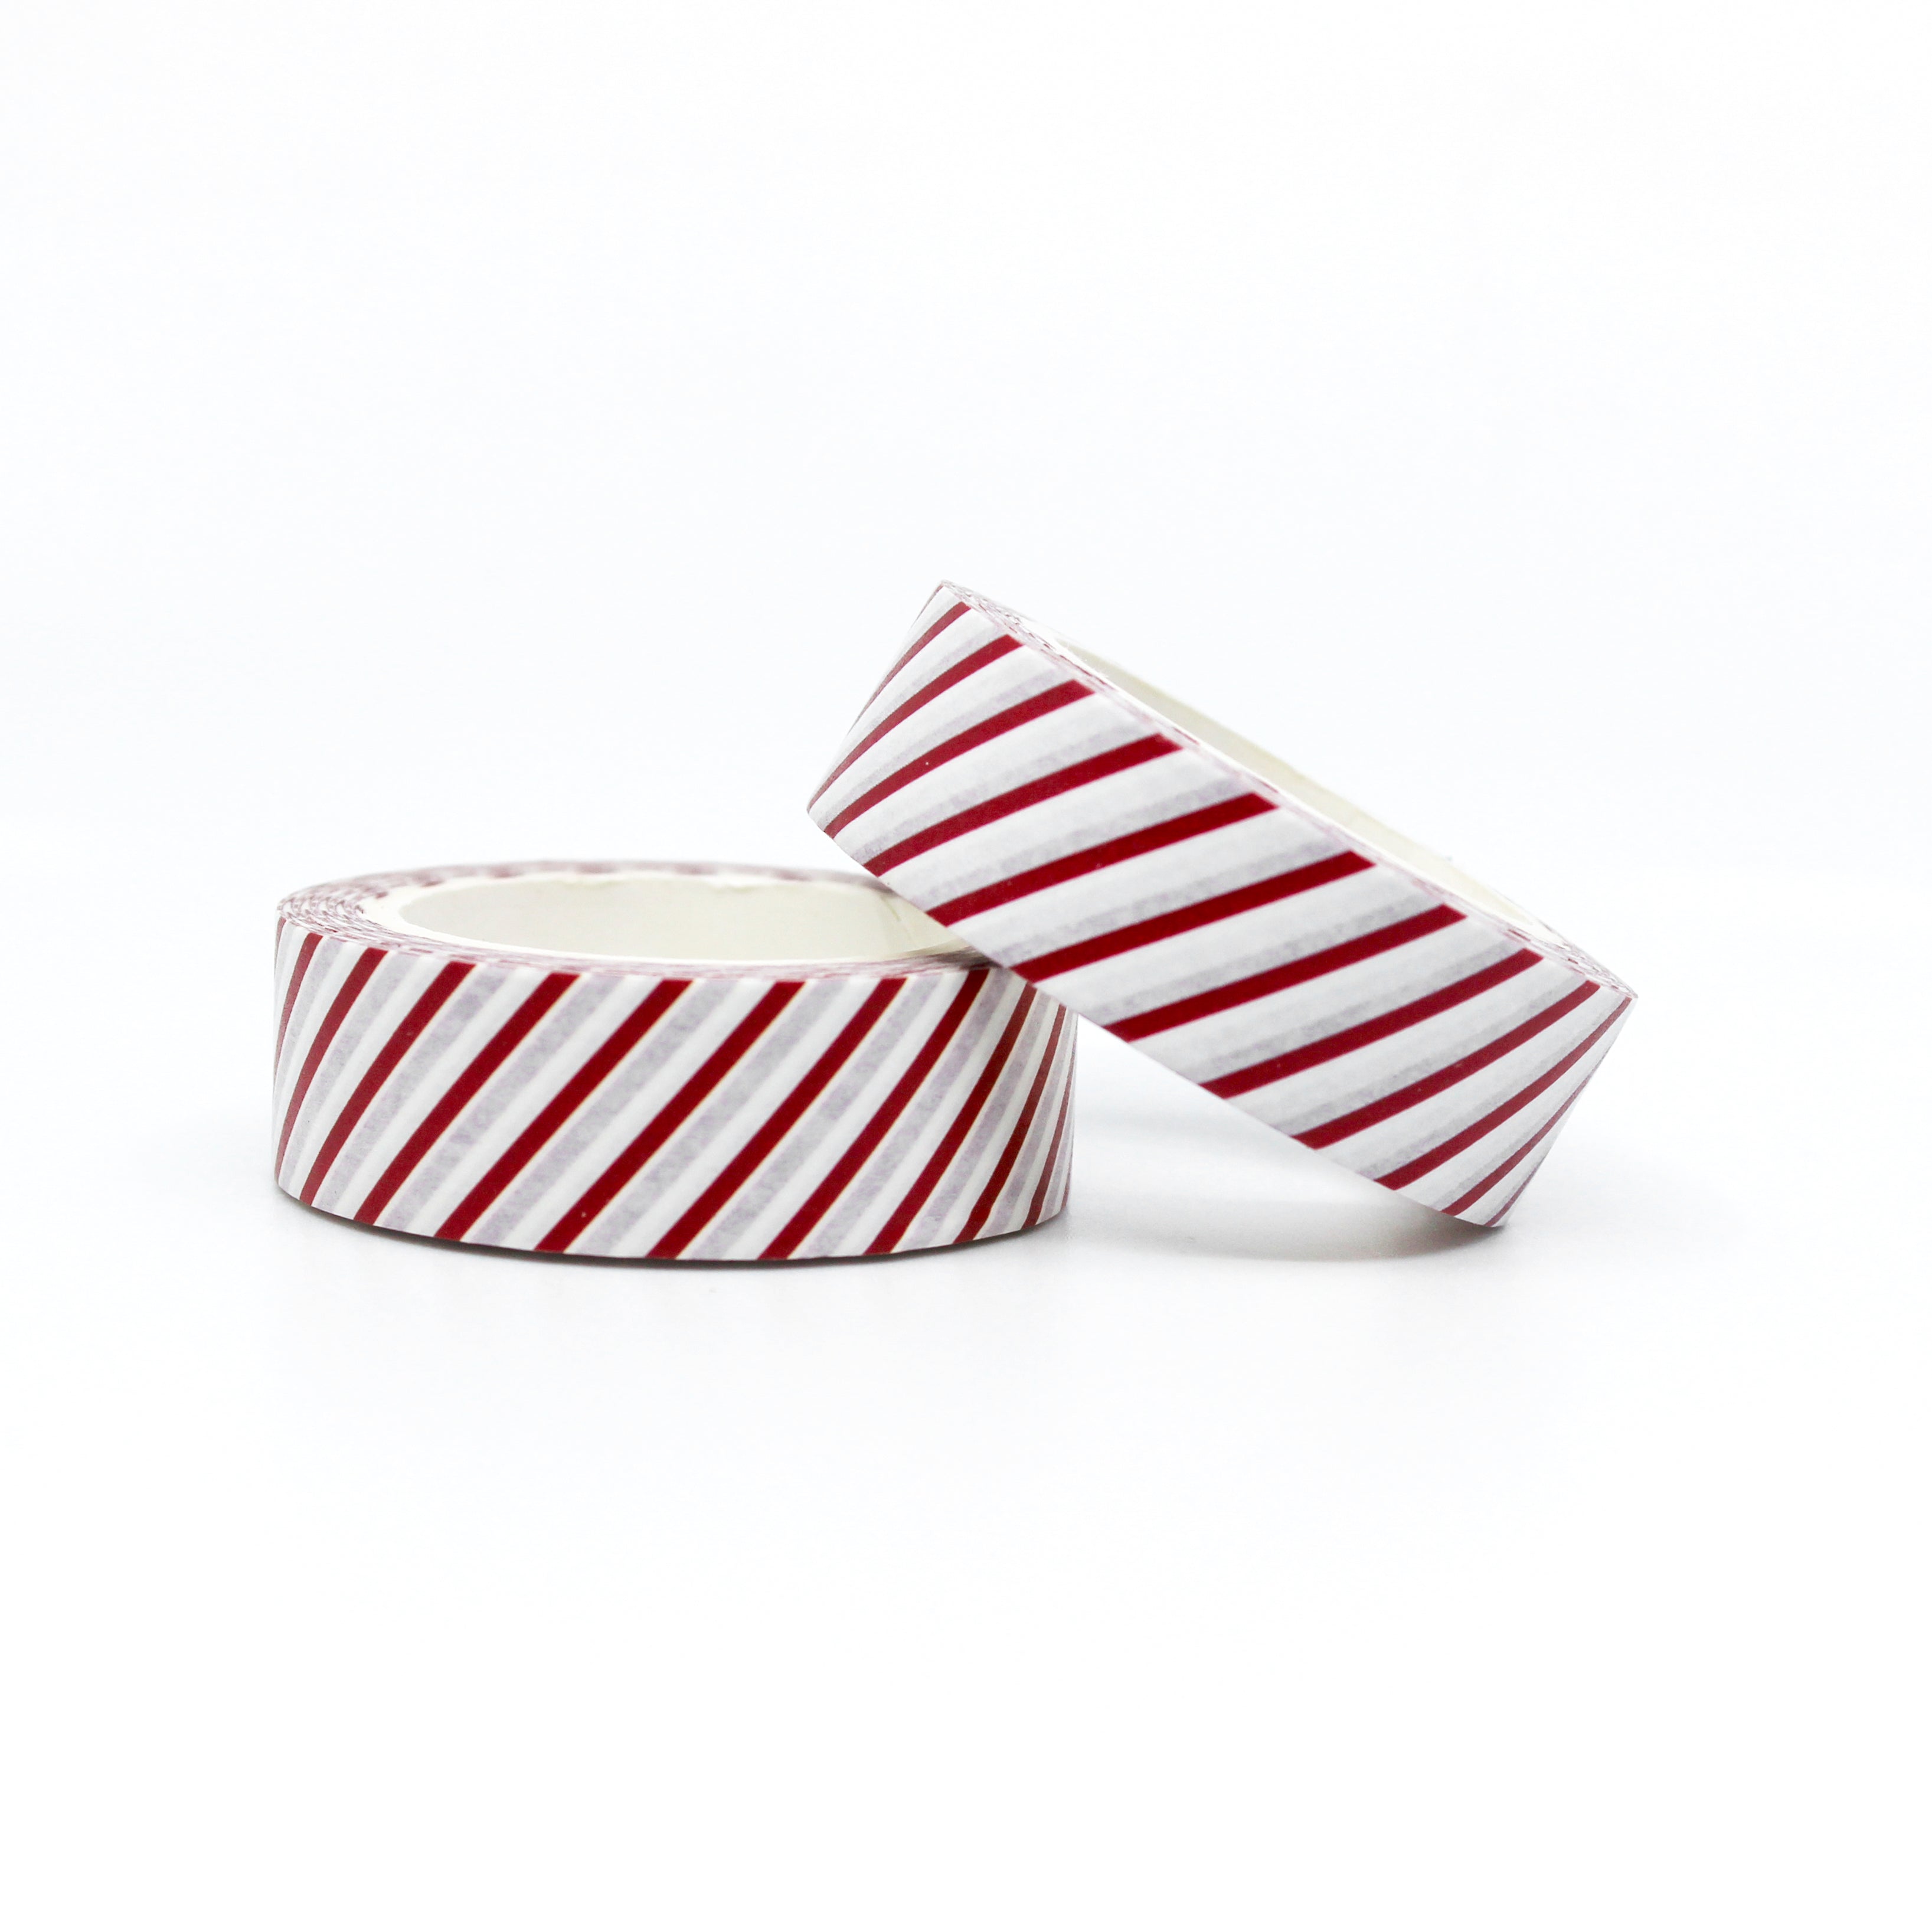 Red Stripes Washi Tape, Journaling and Planner Tapes